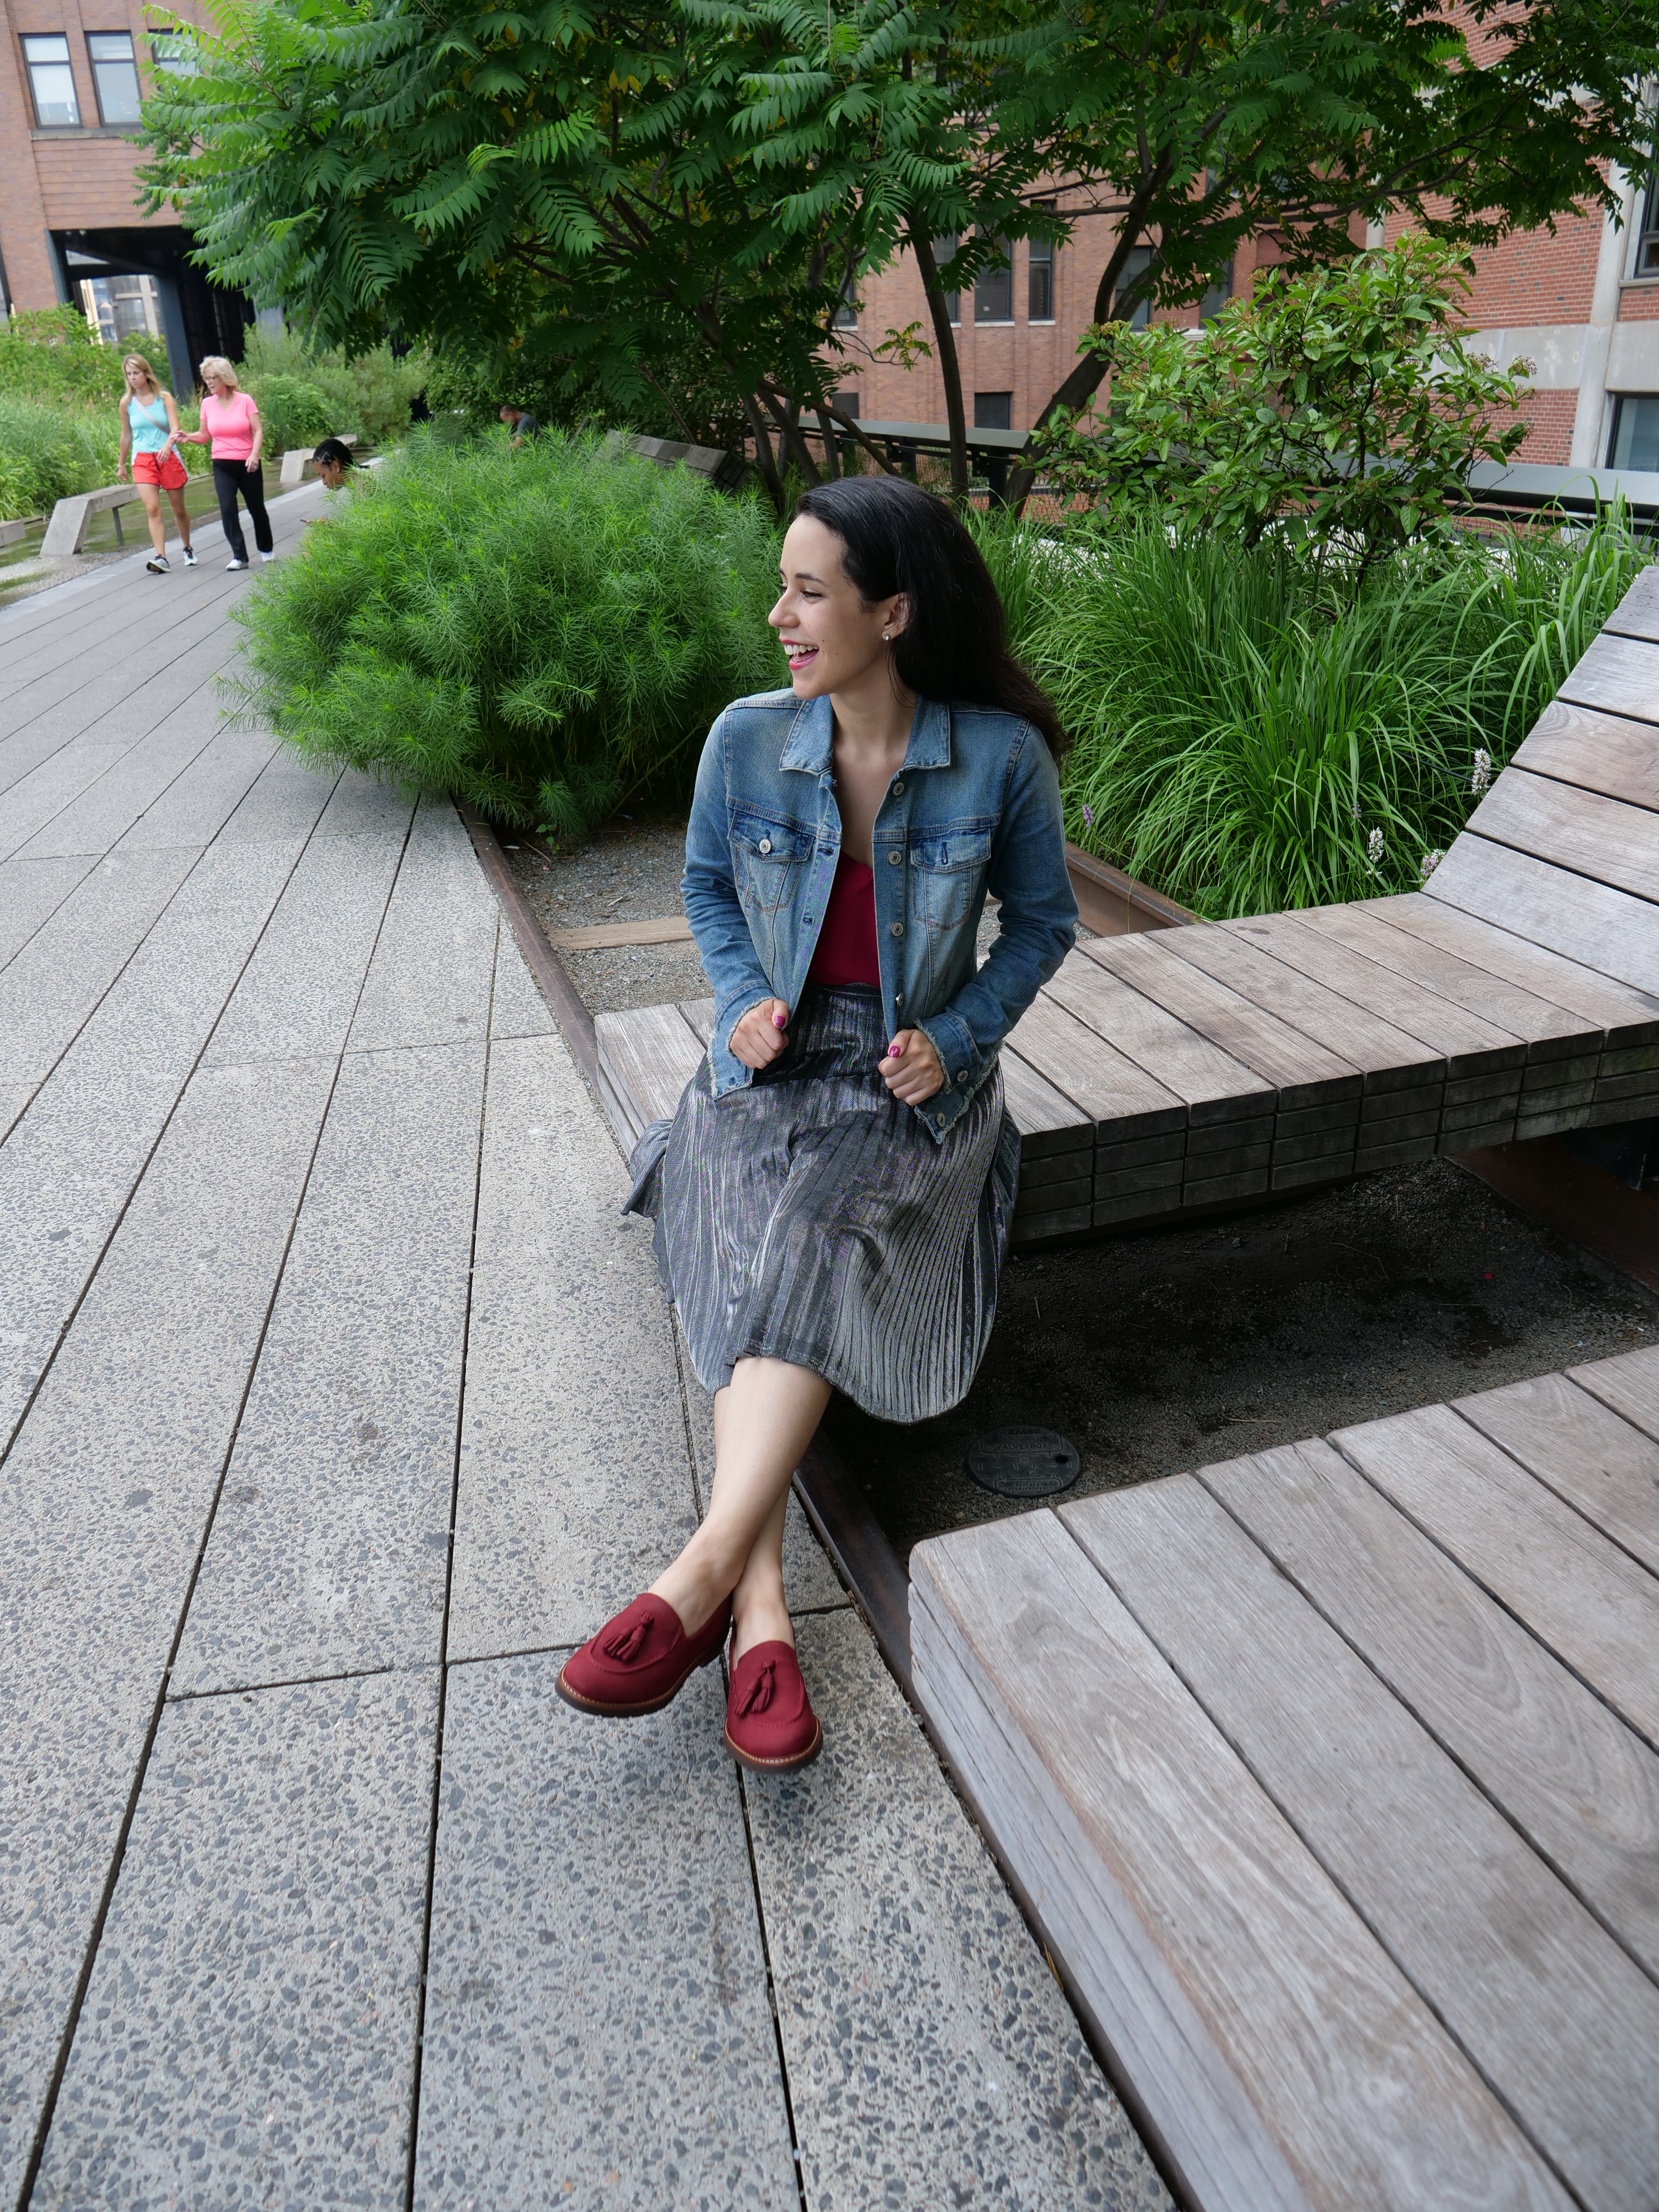 NYC High Line Secret Park benches lounge chairs that move woman in jean jacket sitting